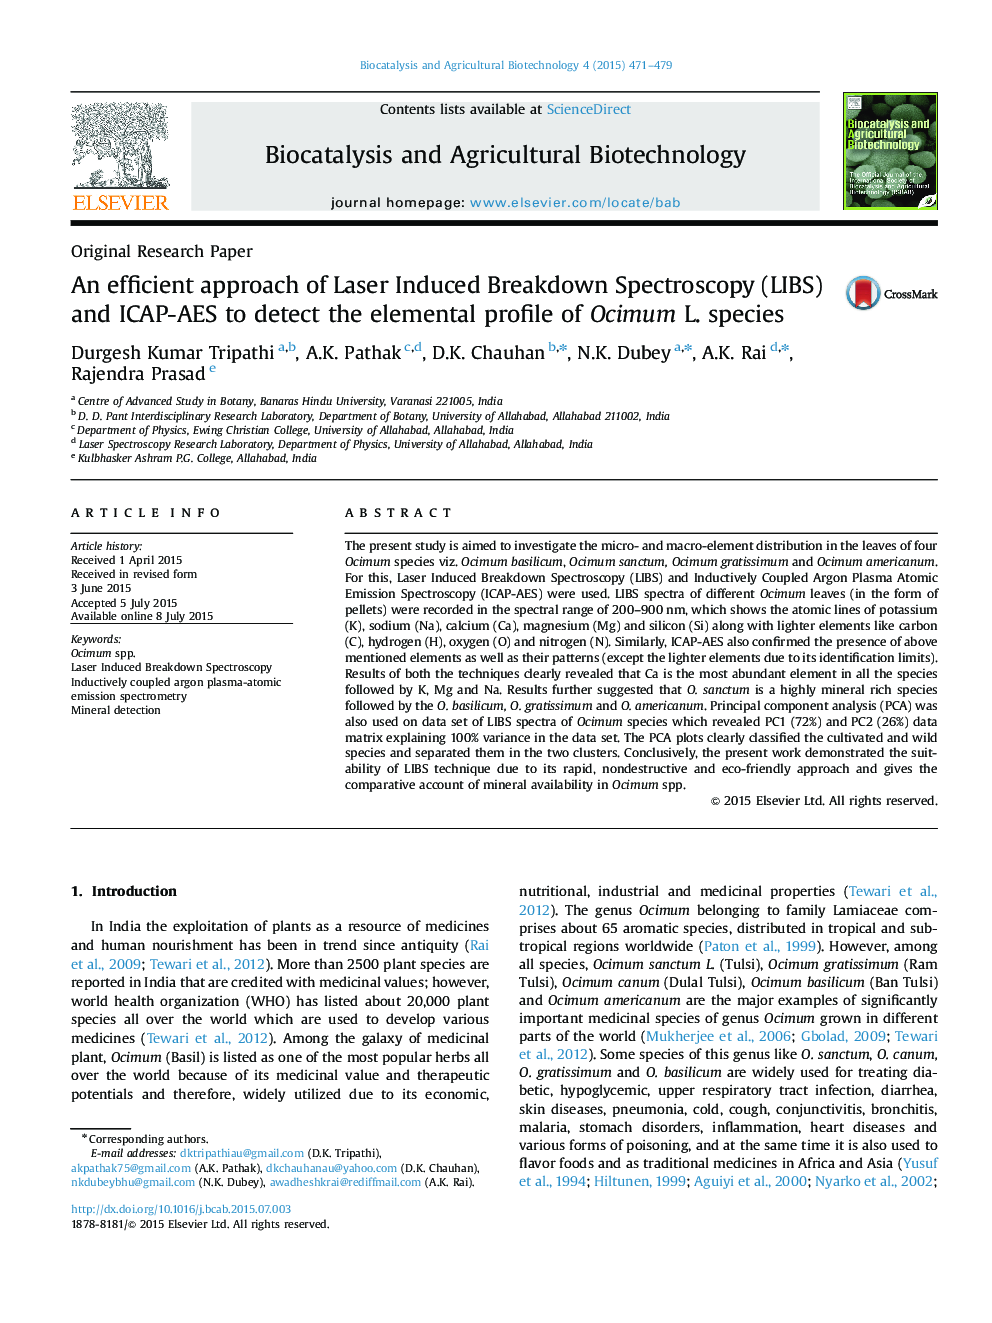 An efficient approach of Laser Induced Breakdown Spectroscopy (LIBS) and ICAP-AES to detect the elemental profile of Ocimum L. species